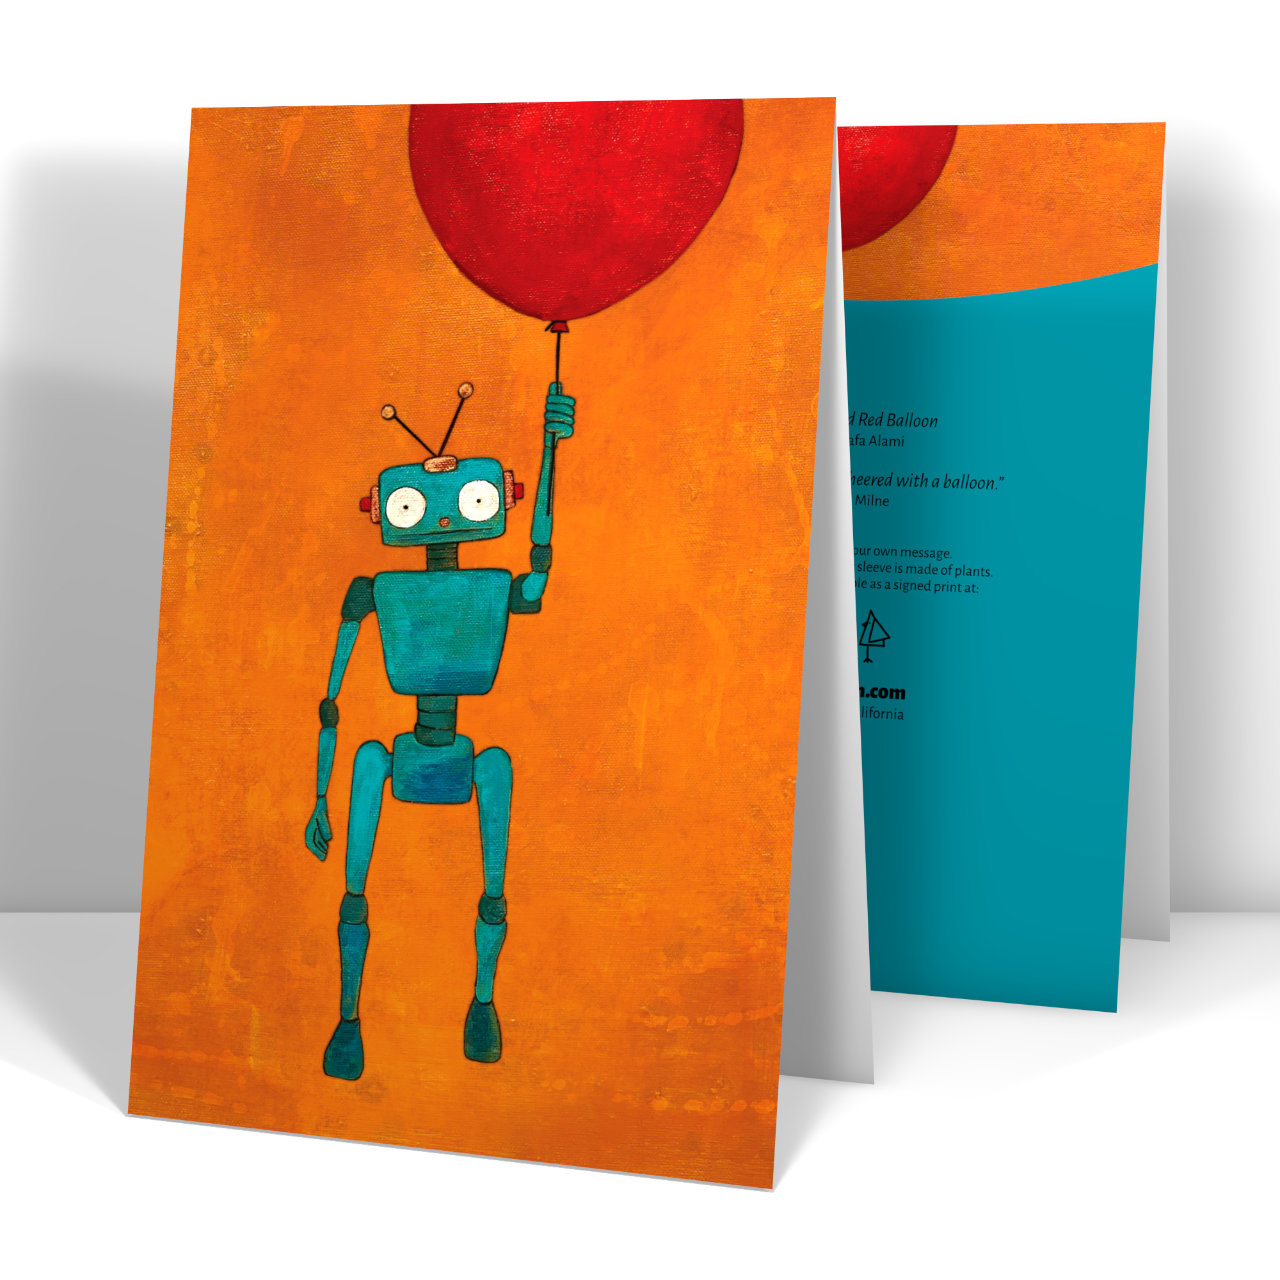 Painting of Robot carrying a red balloon